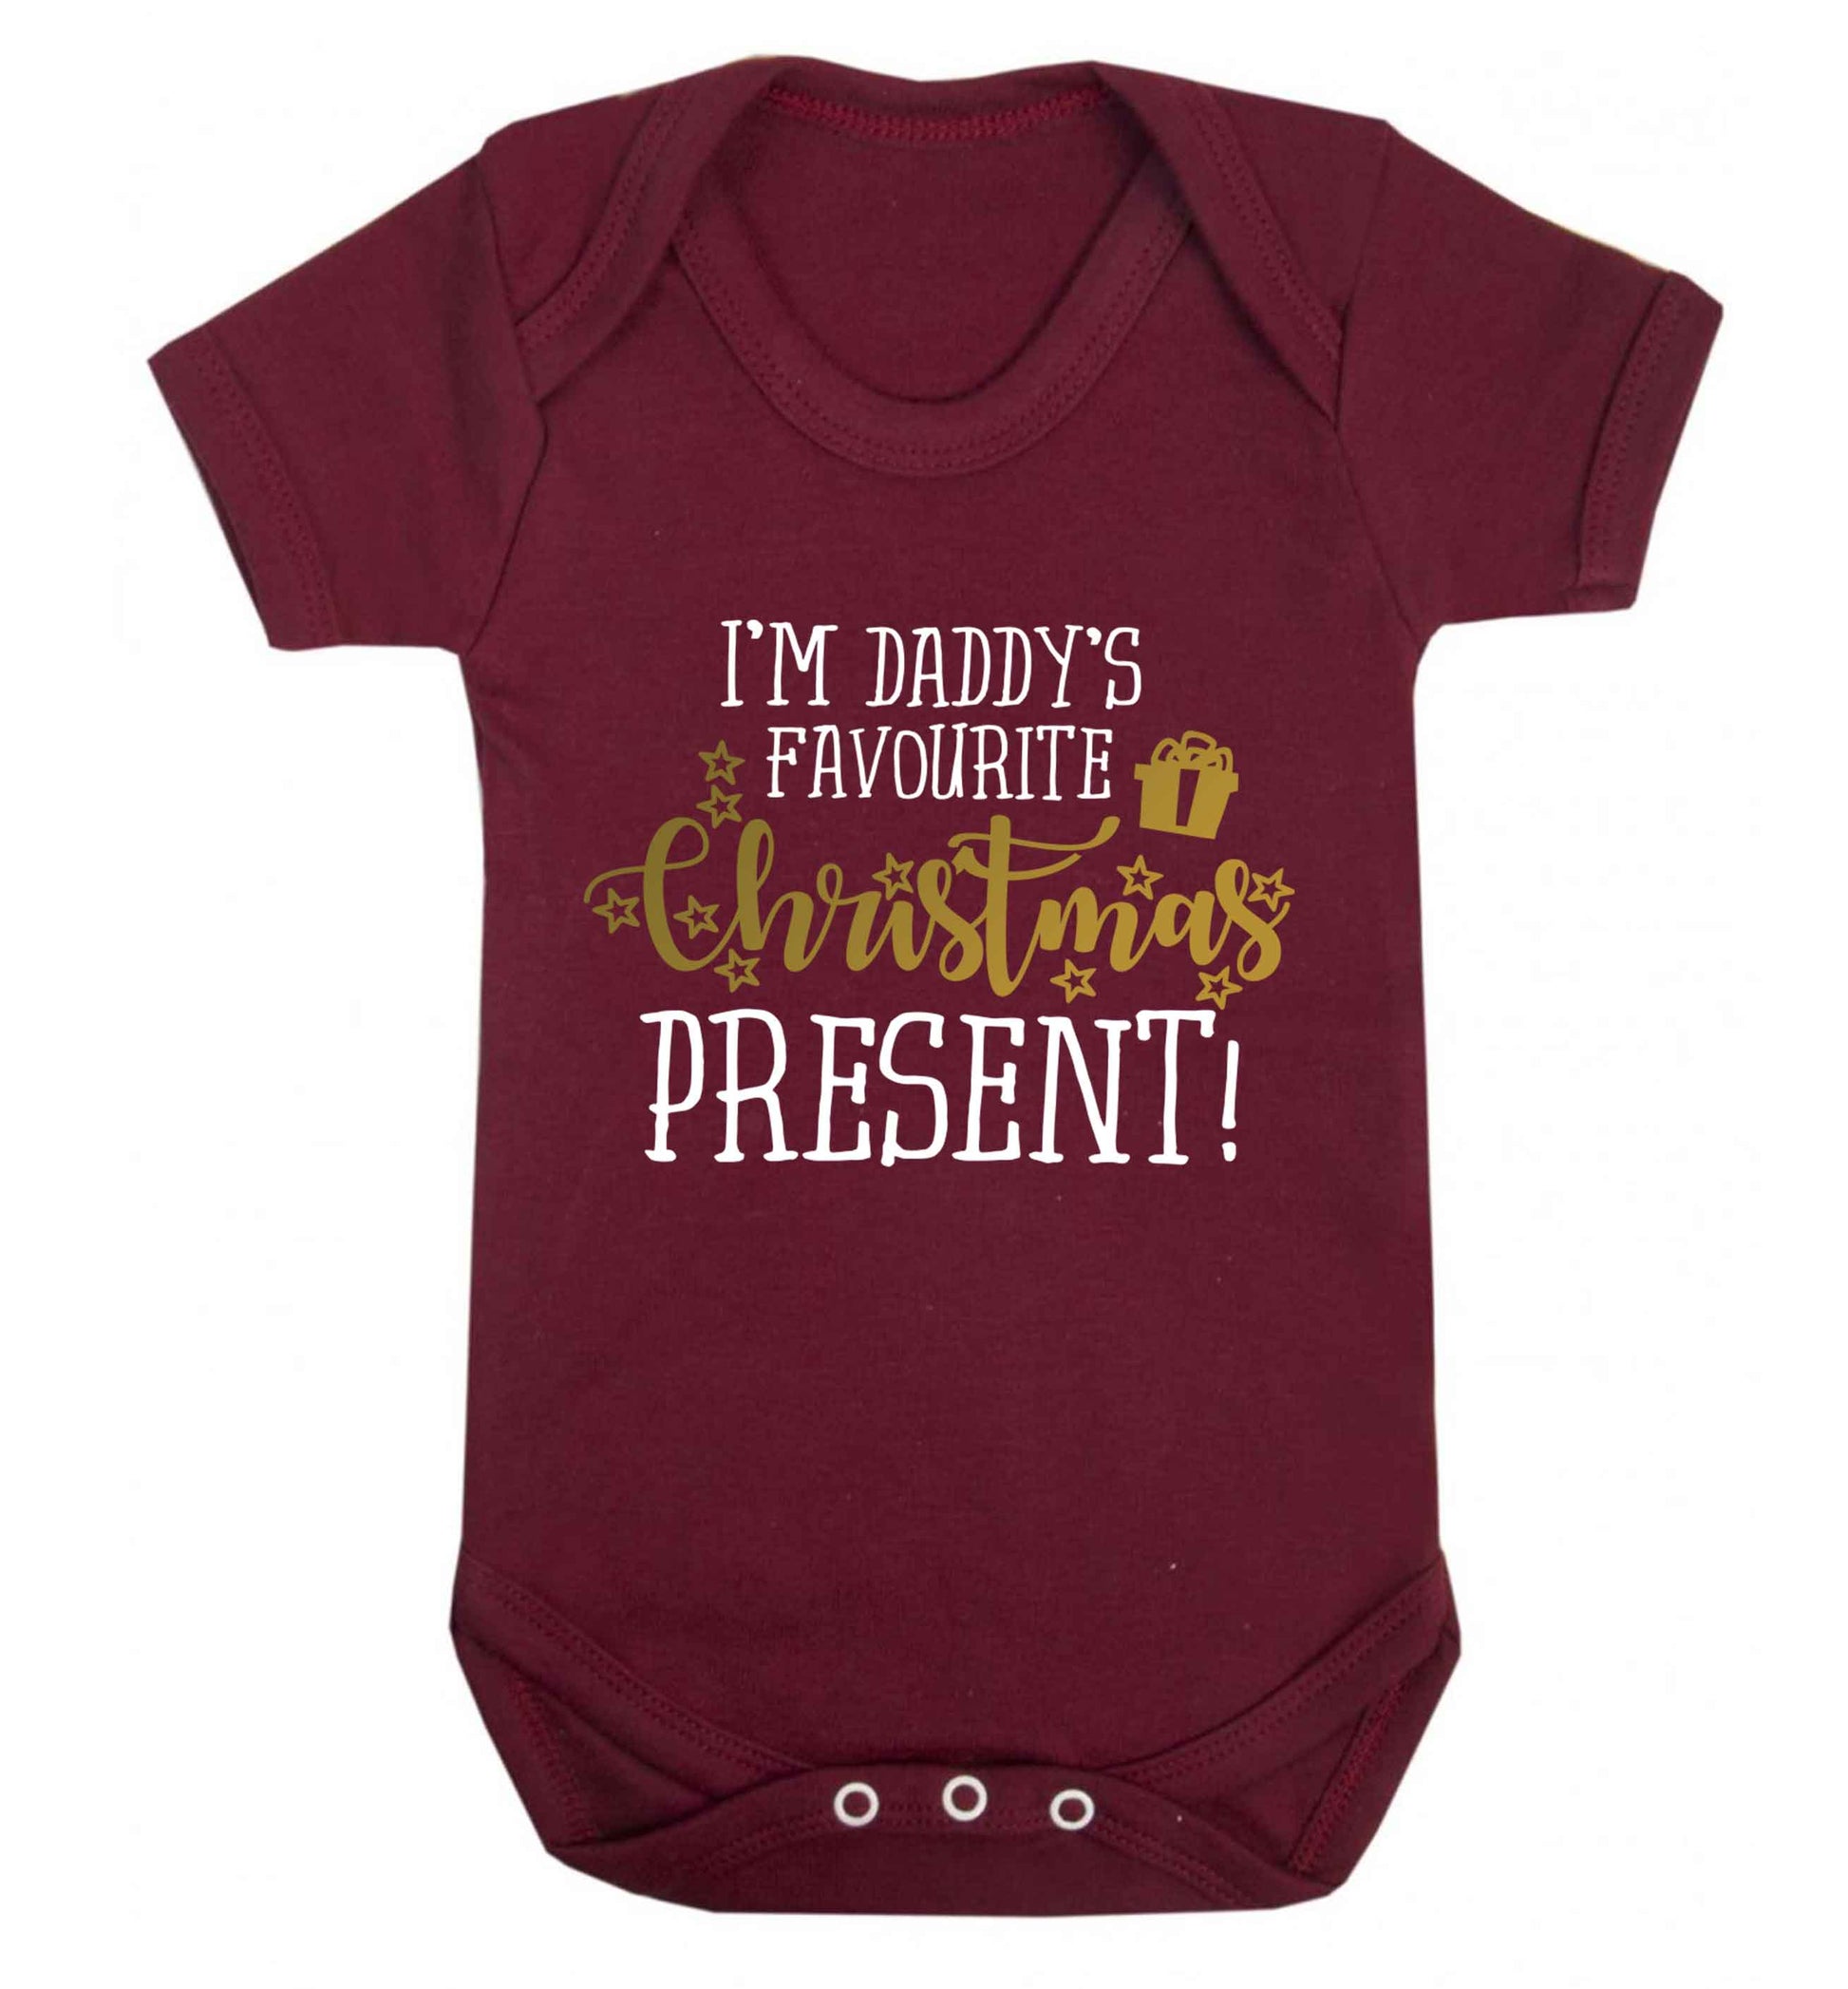 Daddy's favourite Christmas present Baby Vest maroon 18-24 months